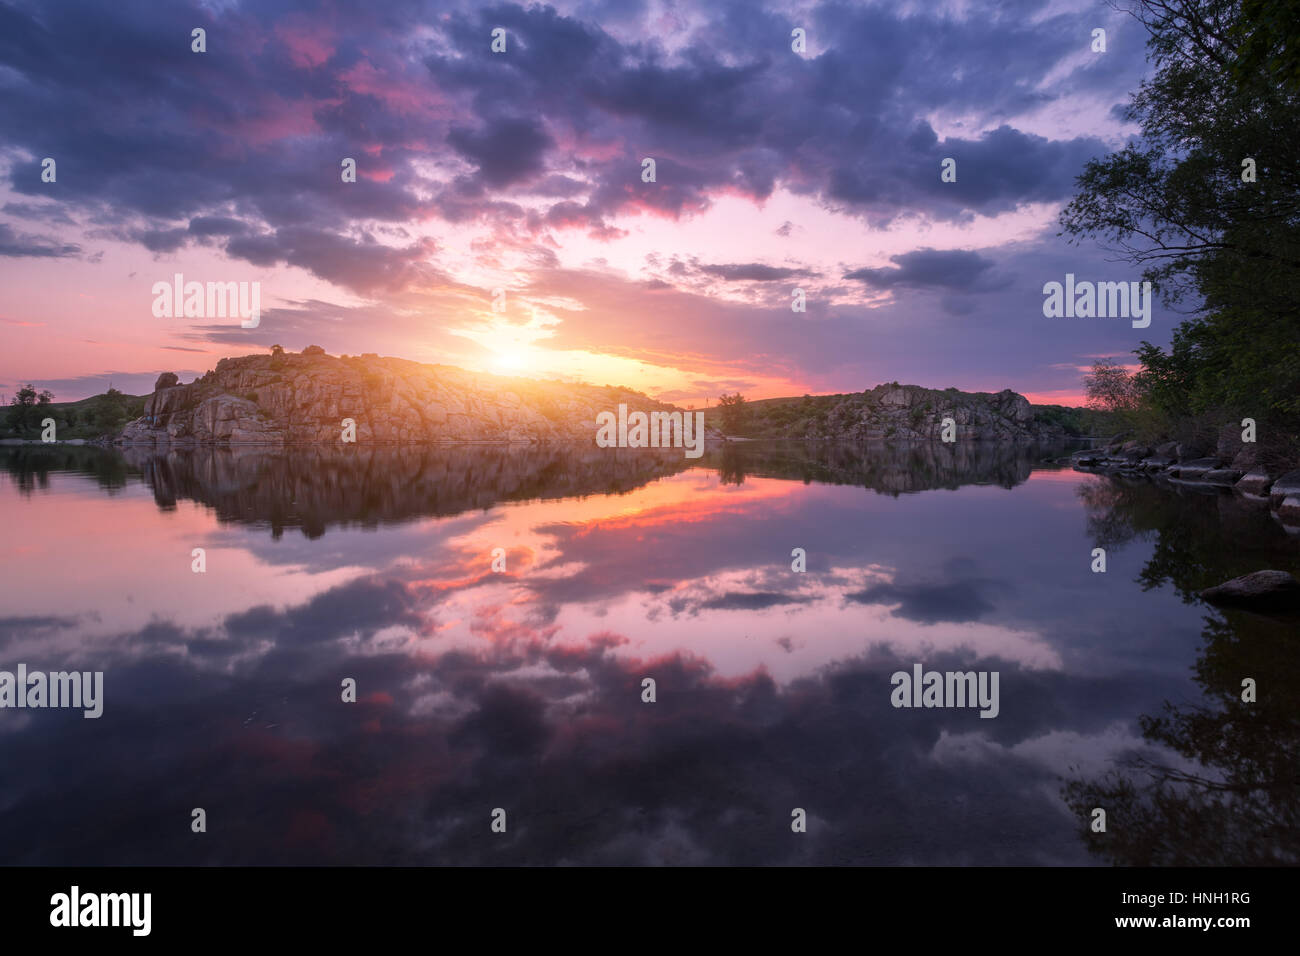 River against colorful sky with clouds and rocks at sunset in summer. Beautiful landscape with lake, mountains, sunlight and blue cloudy sky reflected Stock Photo